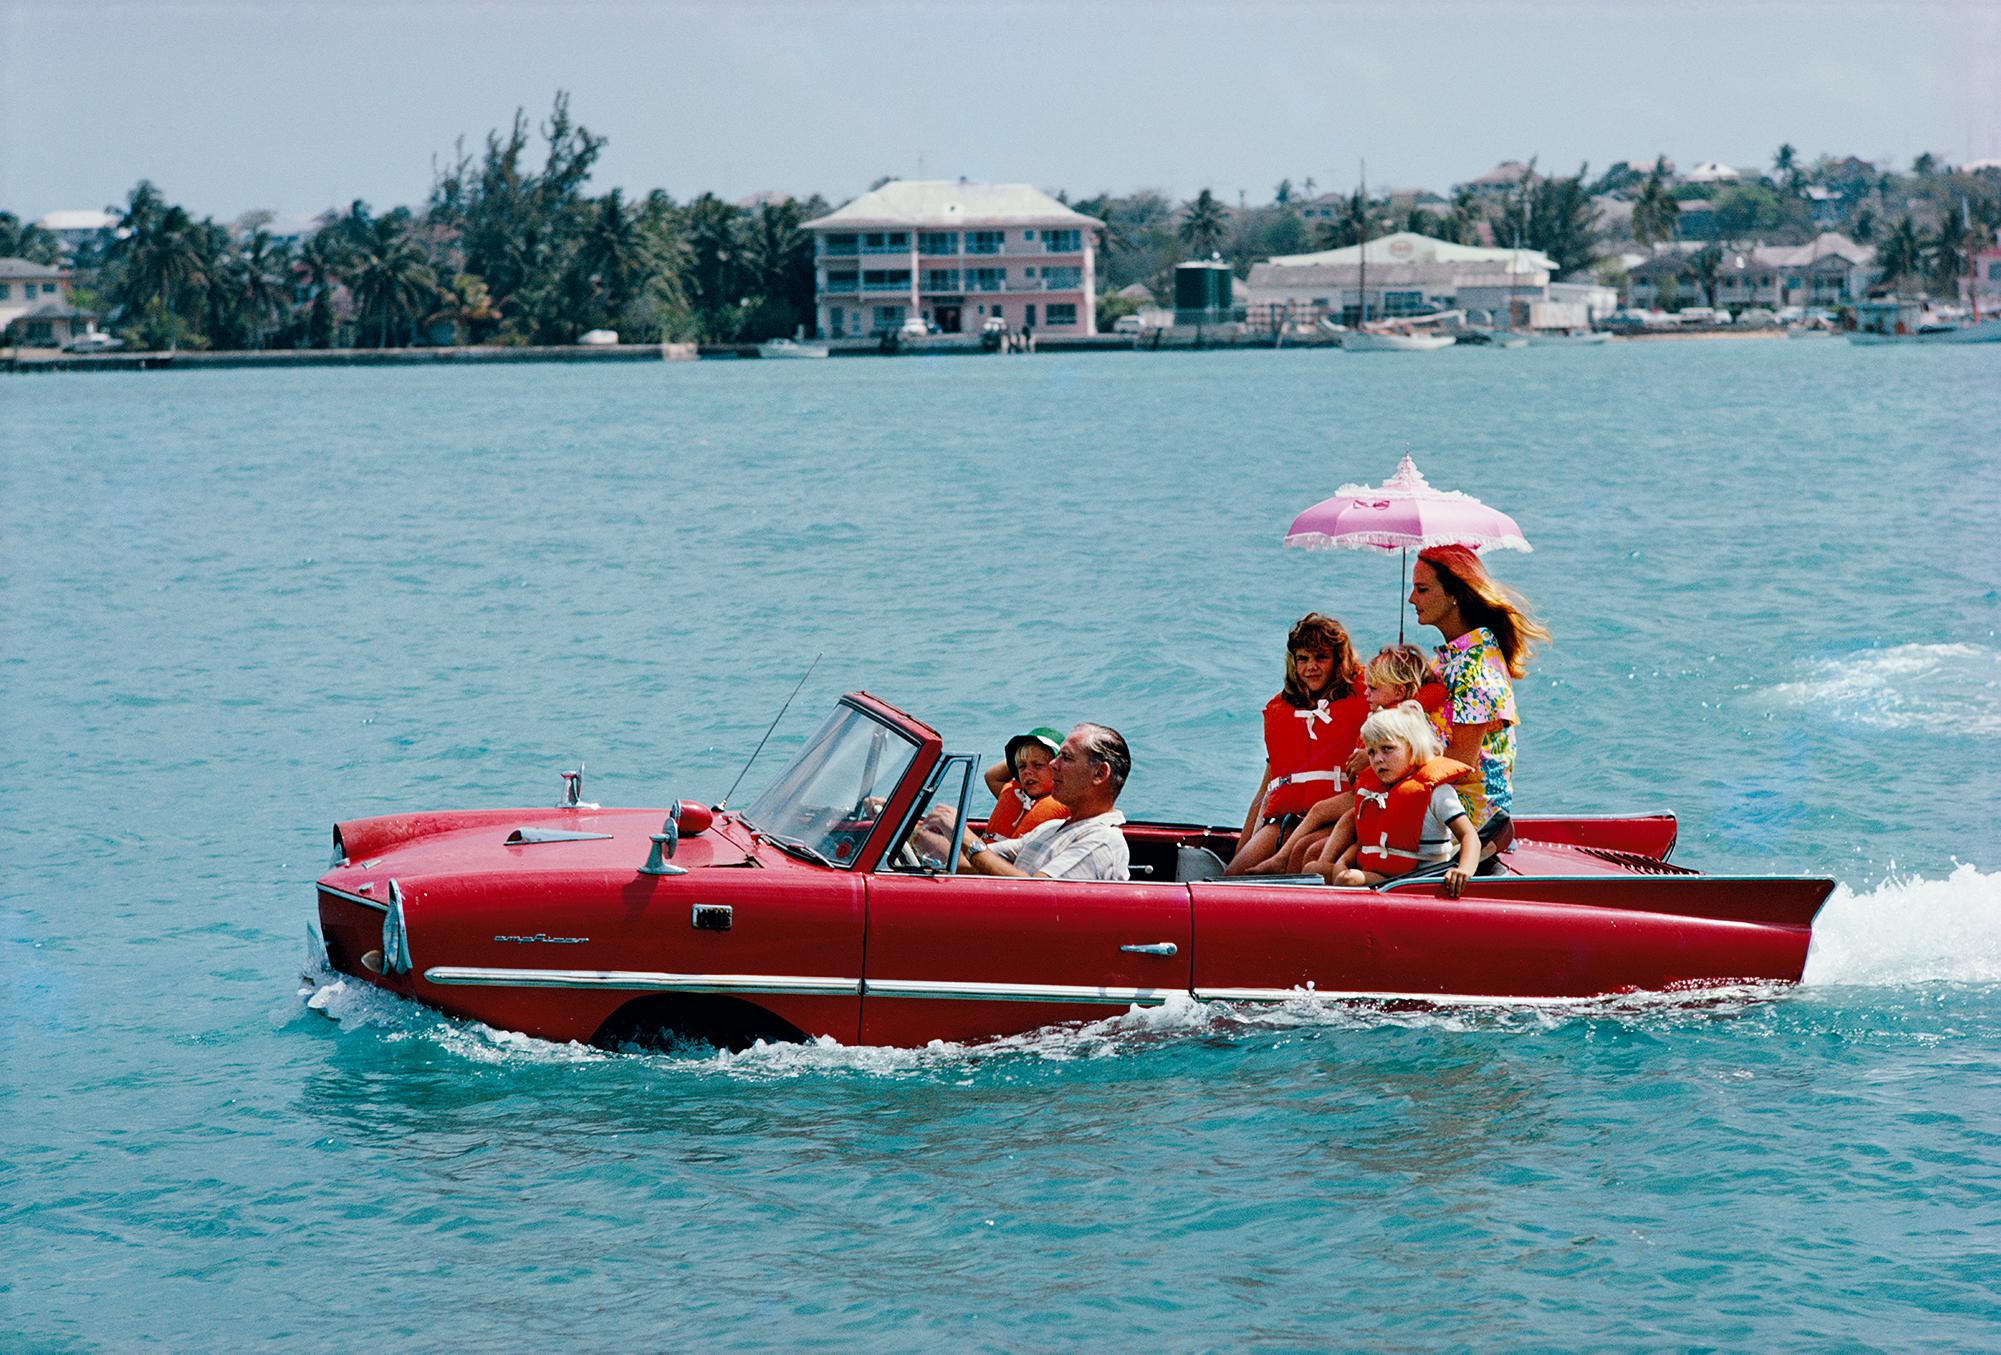 Slim Aarons
Sea Drive, 1967
C-Print
Estate signature stamped and hand numbered edition of 150 with certificate of authenticity from the Slim Aarons estate

Film producer Kevin McClory takes his wife Bobo Sigrist and their family for a drive in an